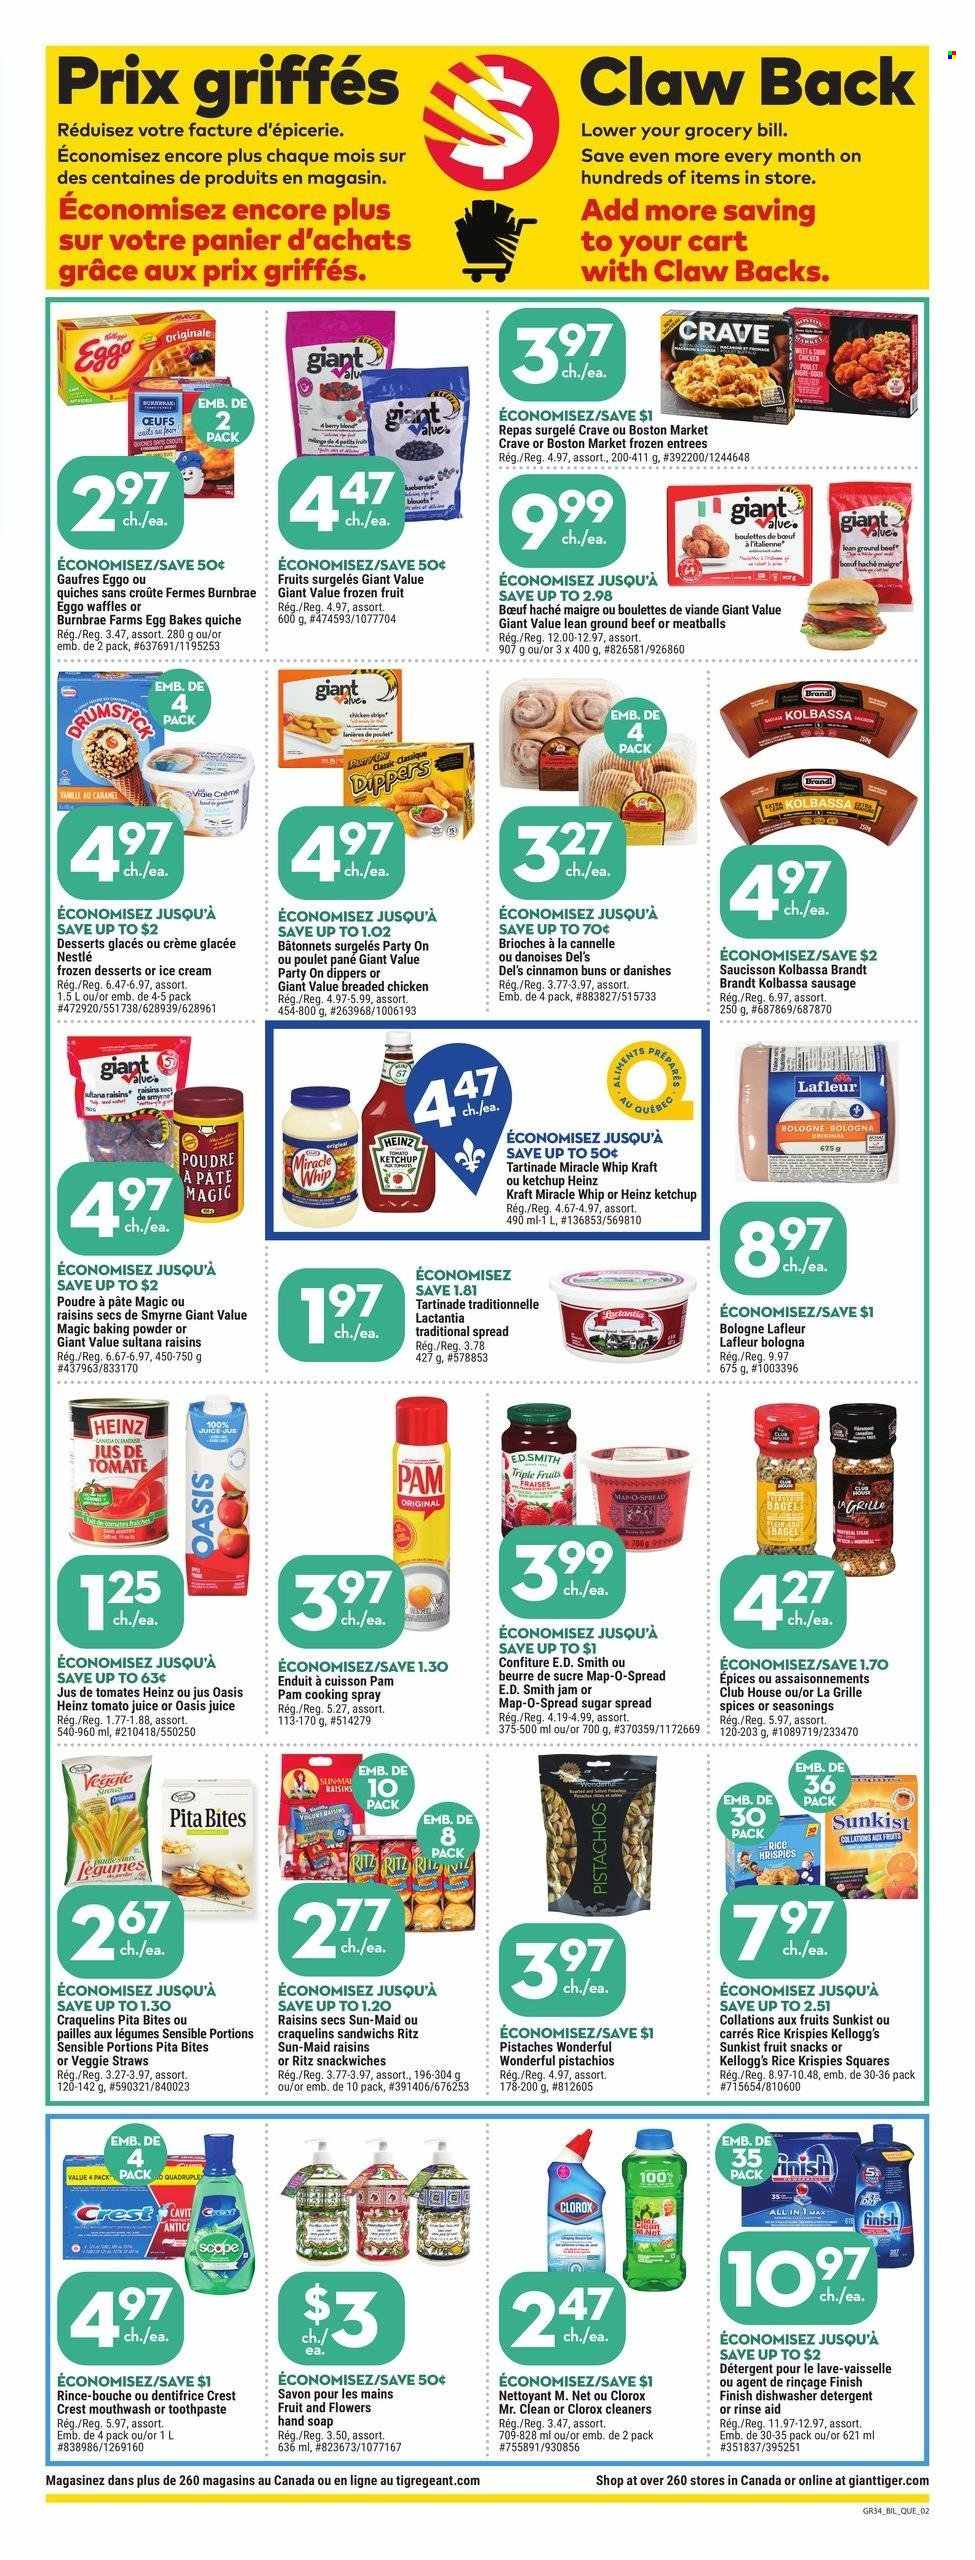 thumbnail - Giant Tiger Flyer - March 22, 2023 - March 28, 2023 - Sales products - pita, buns, waffles, meatballs, fried chicken, Kraft®, bologna sausage, sausage, Miracle Whip, ice cream, quiche, Kellogg's, fruit snack, RITZ, veggie straws, baking powder, sugar, Rice Krispies, cinnamon, caramel, cooking spray, fruit jam, pistachios, tomato juice, juice, chicken, beef meat, ground beef, Clorox, hand soap, soap, toothpaste, mouthwash, Crest, scope, cart, flowers, detergent, Nestlé, Heinz, ketchup. Page 3.